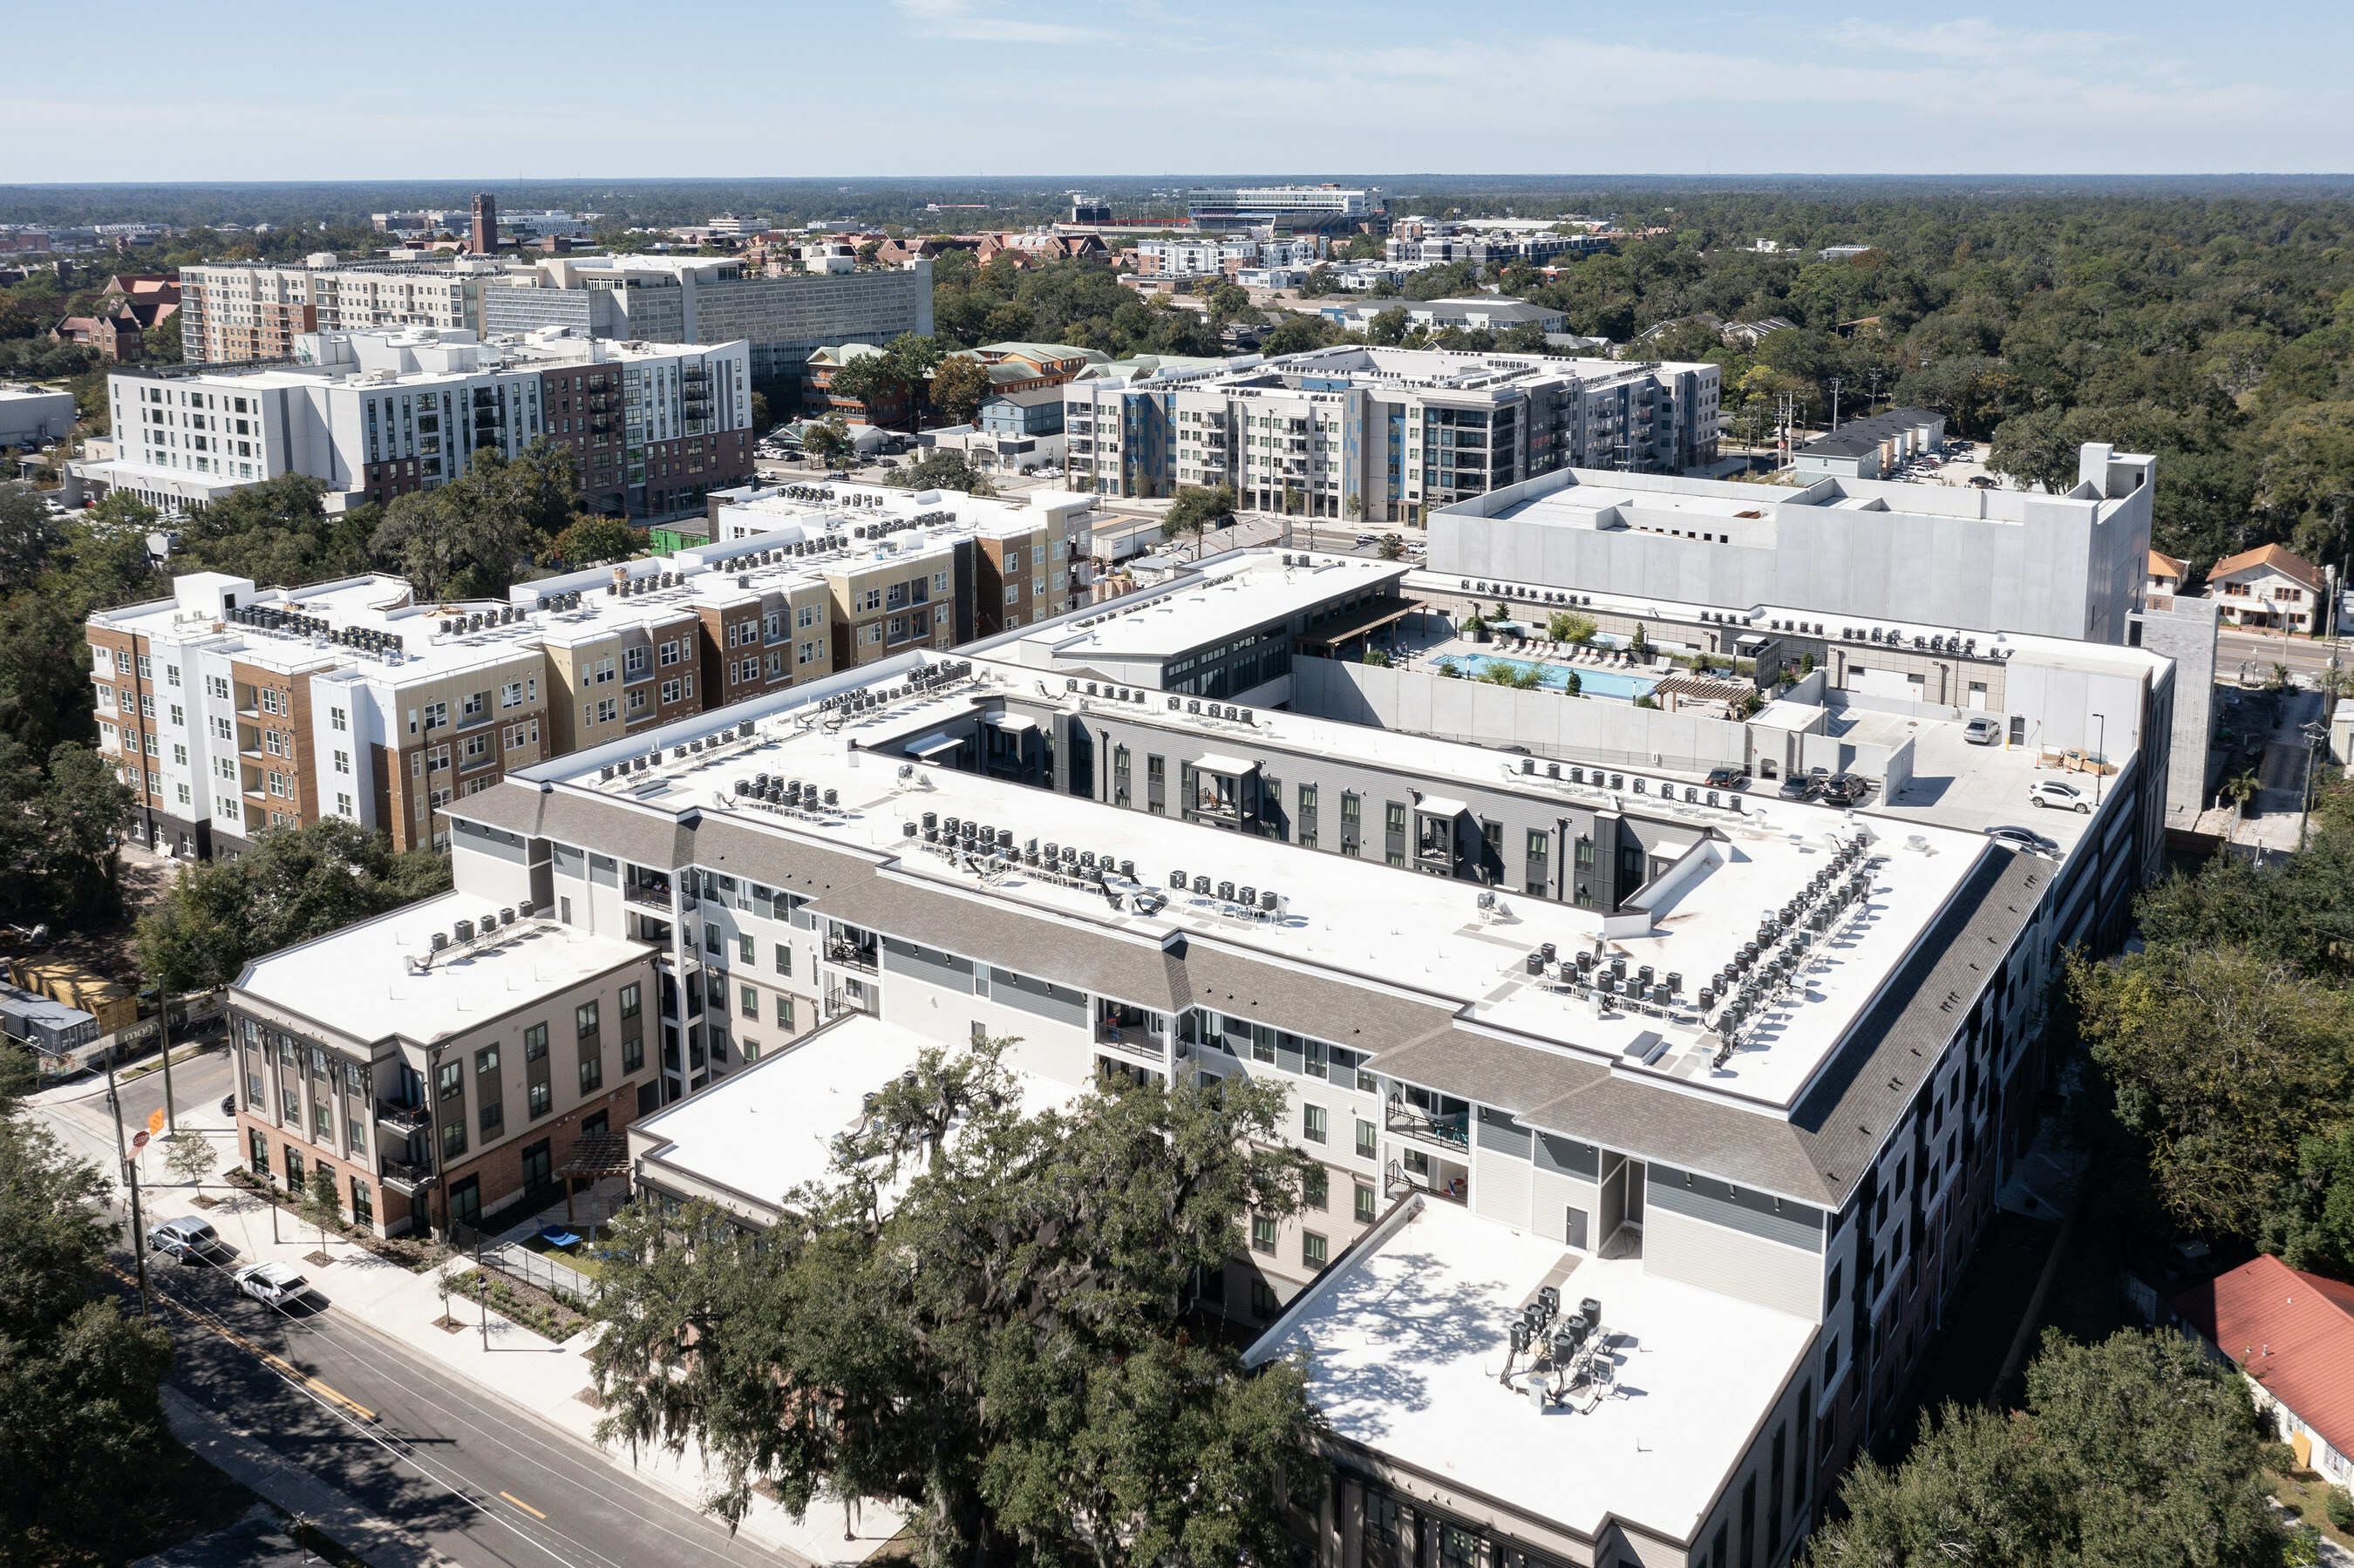 FaverGray Celebrates Completion of 862-Bed Seminary Lane Student Housing Community Near The University of Florida in Gainesville